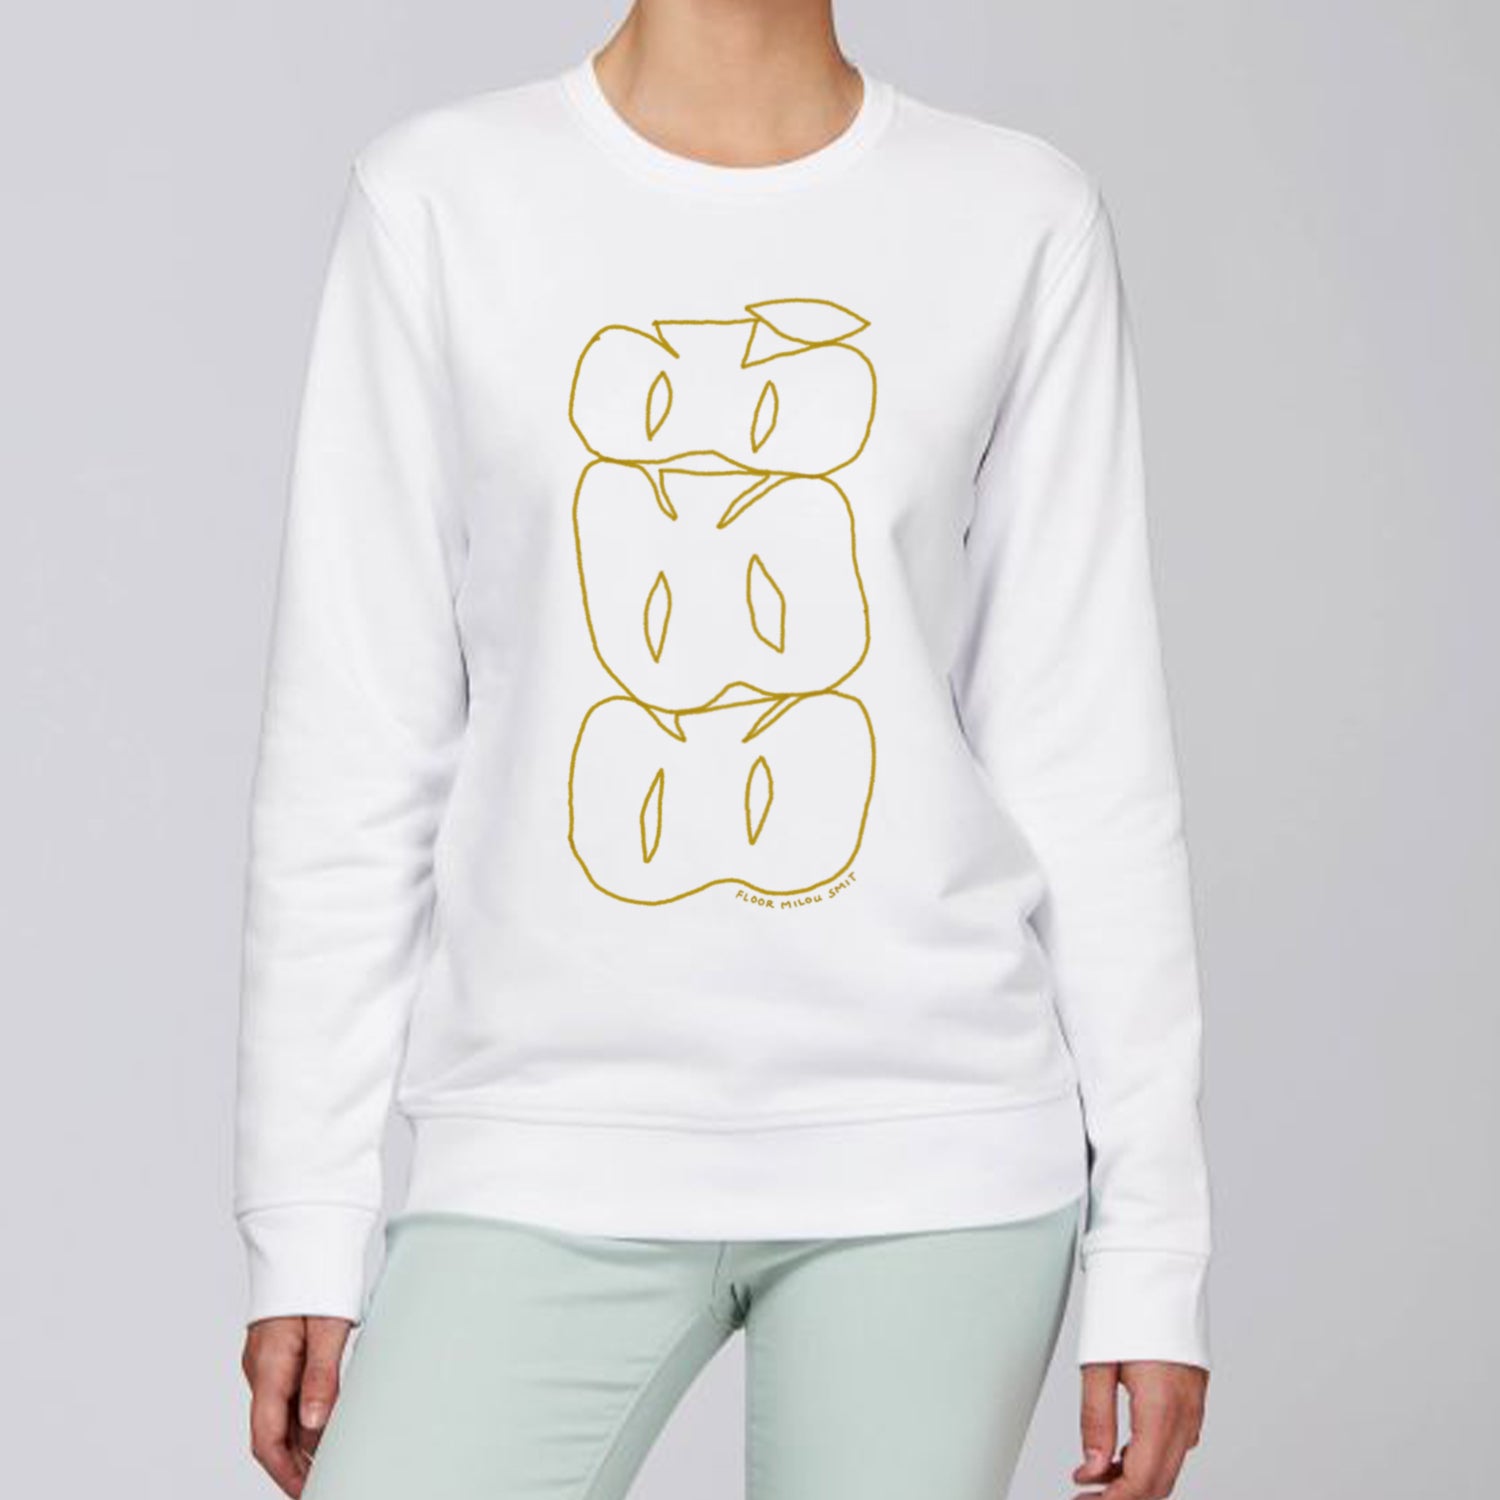 Photo of a model wearing a white sweater. The print on the sweater is a brown line art drawing of 3 cut apples on top of each other forming a stack.